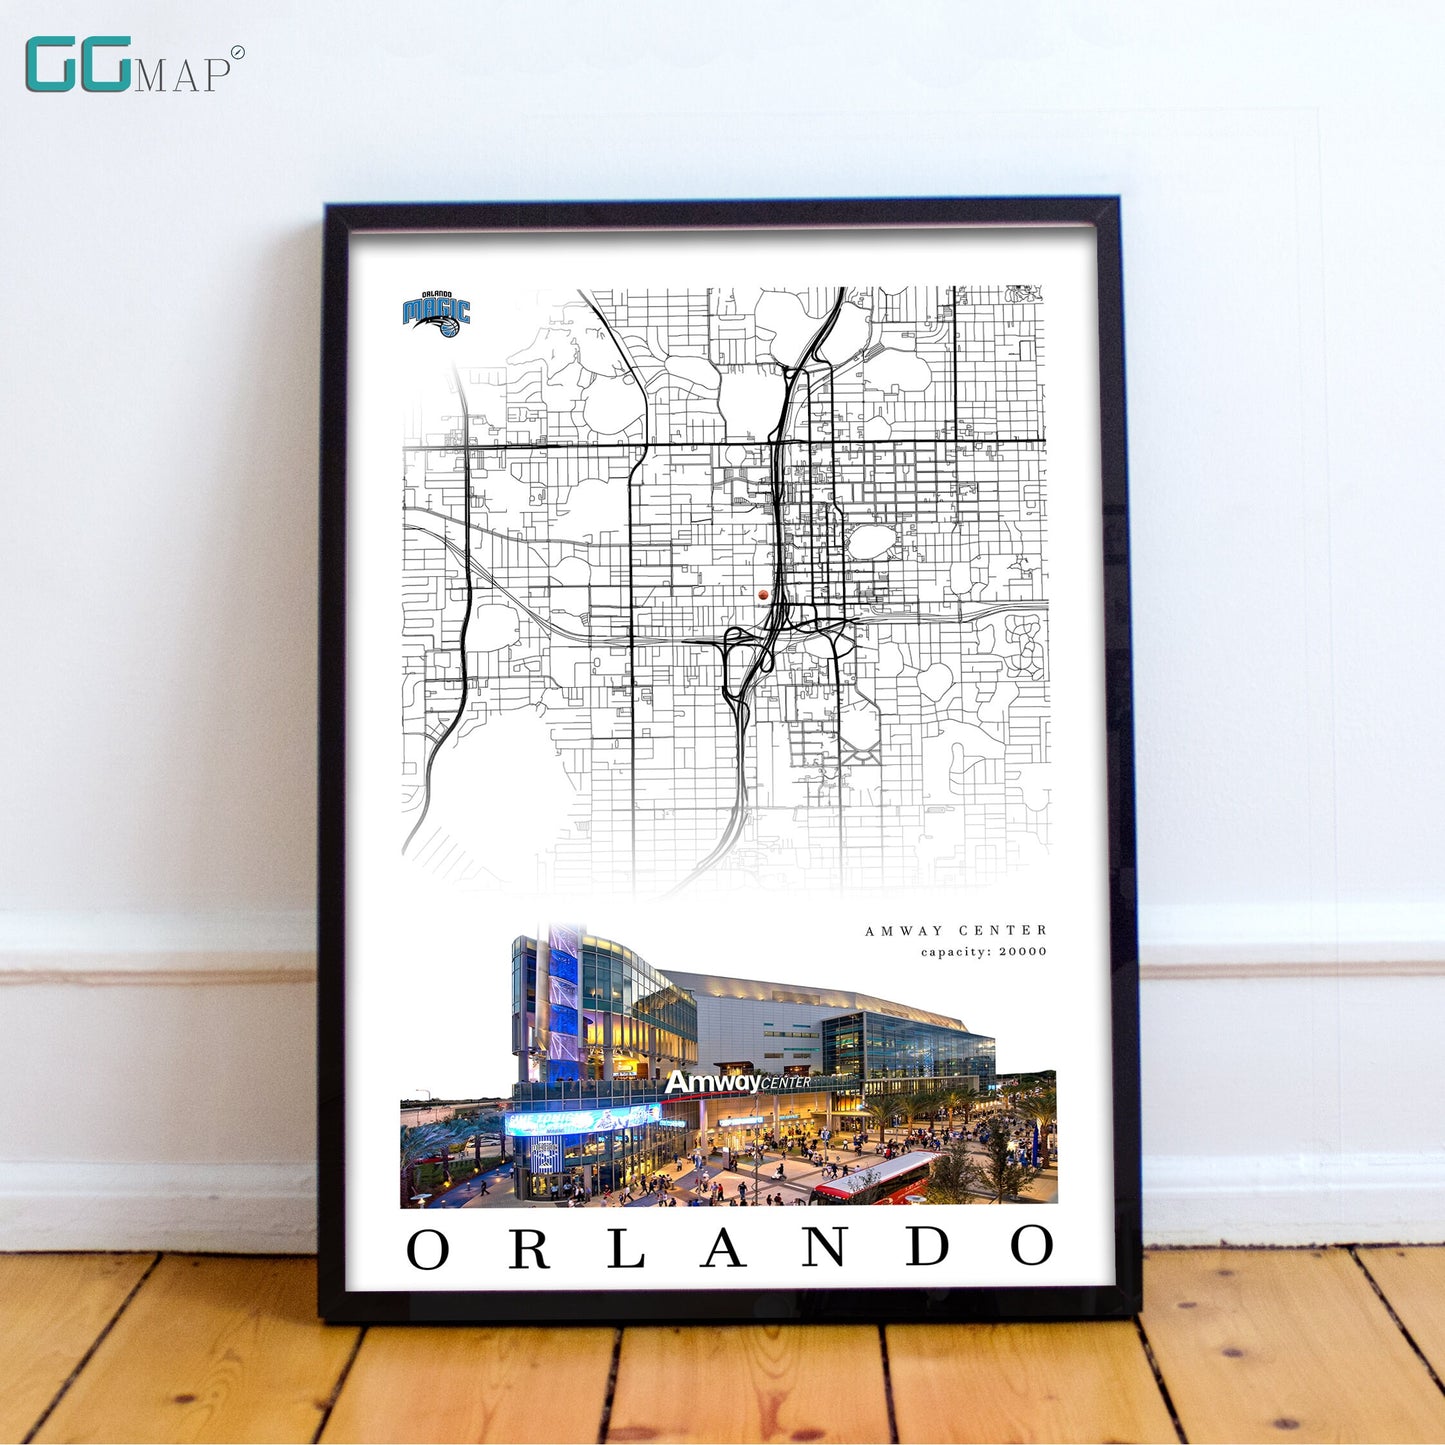 City map of ORLANDO - Amway Center - Home Decor Orlando - Amway Center wall decor - Orlando poster - Orlando gift - Print map